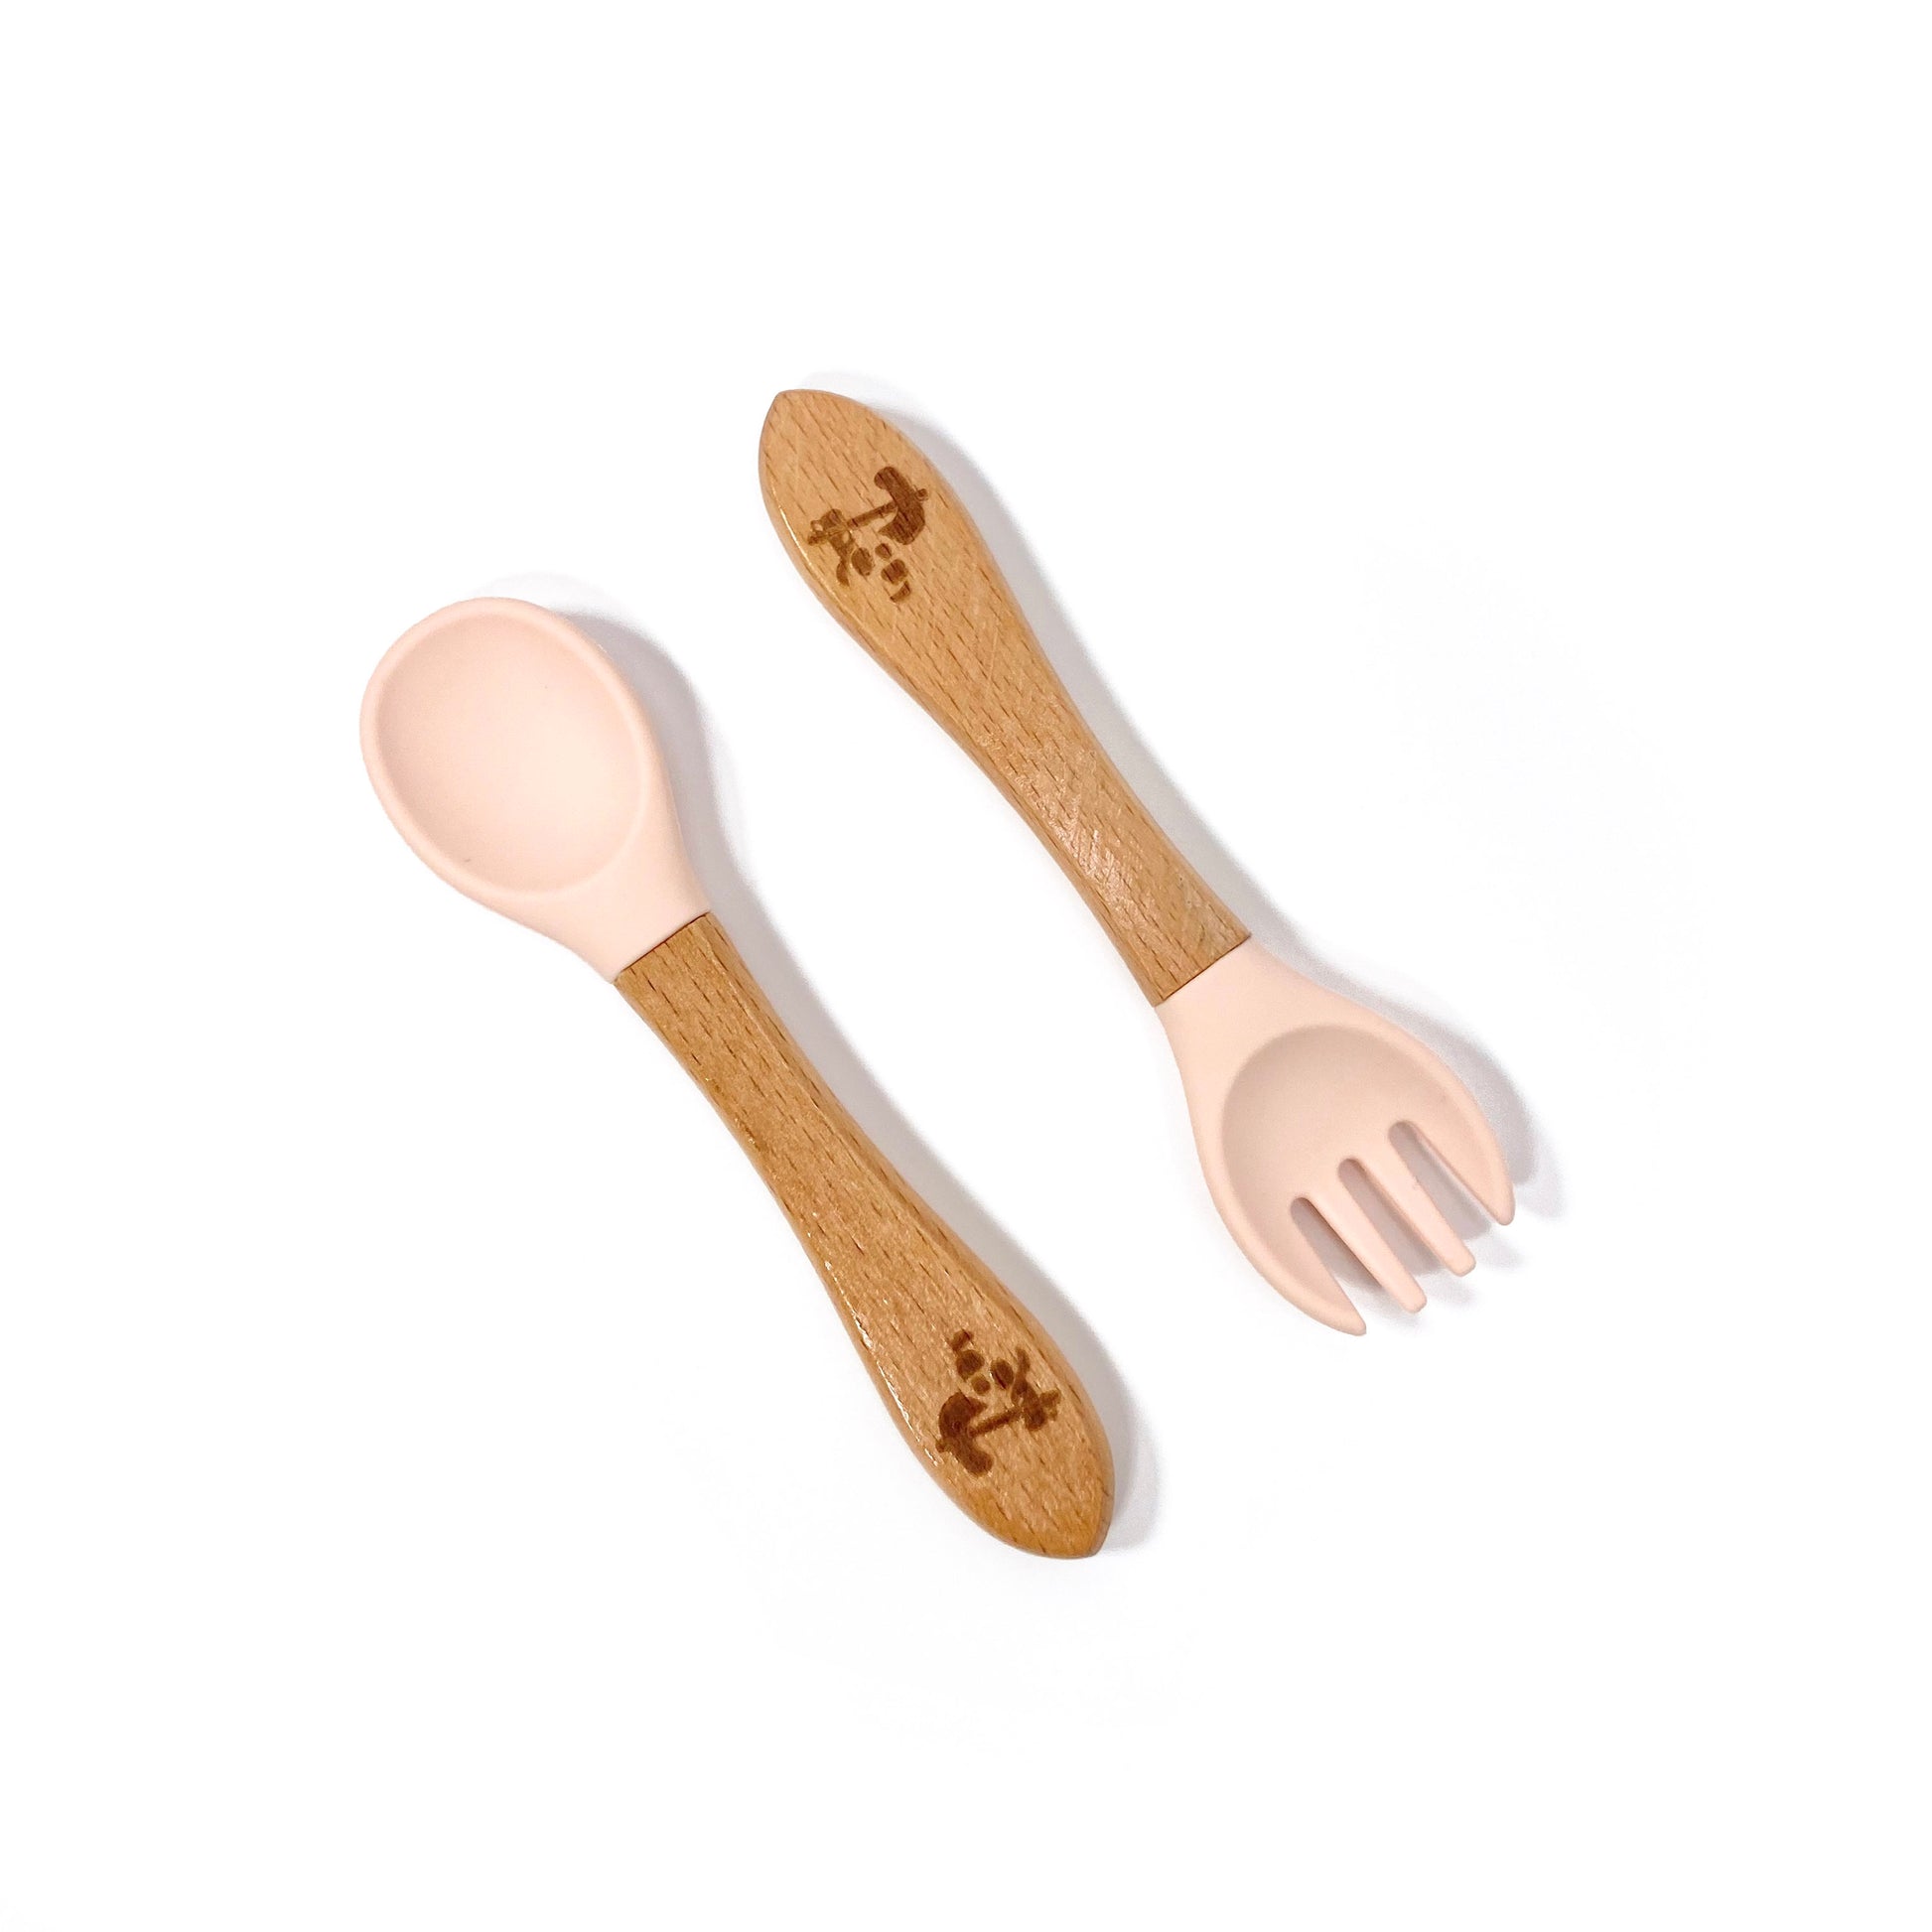 A set of children’s bamboo and silicone cutlery, in peachy pink. The set is comprised of a fork and spoon.